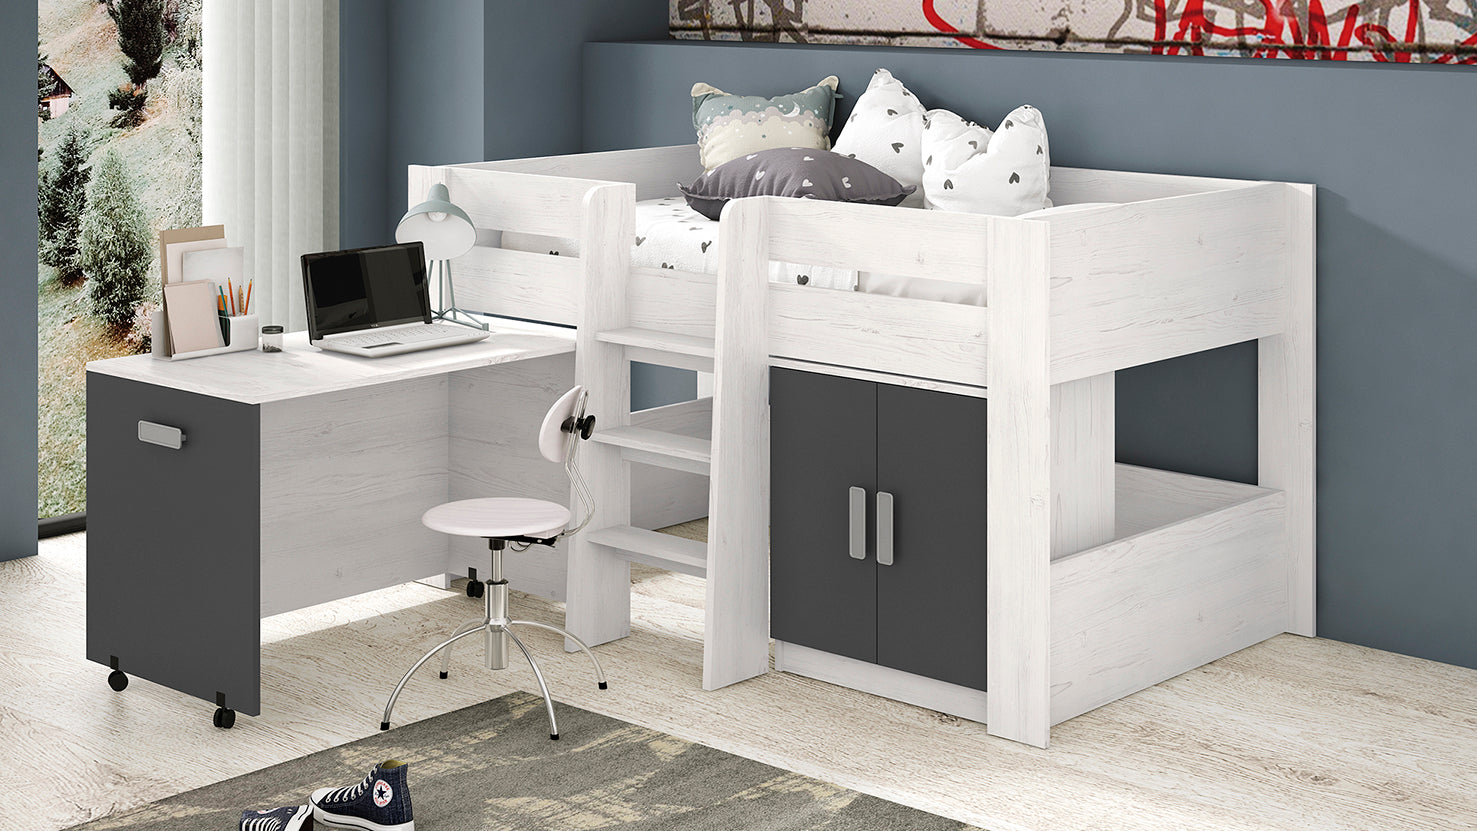 BLOCK BED WITH STUDY TABLE - DONALD AMBIENTE 42